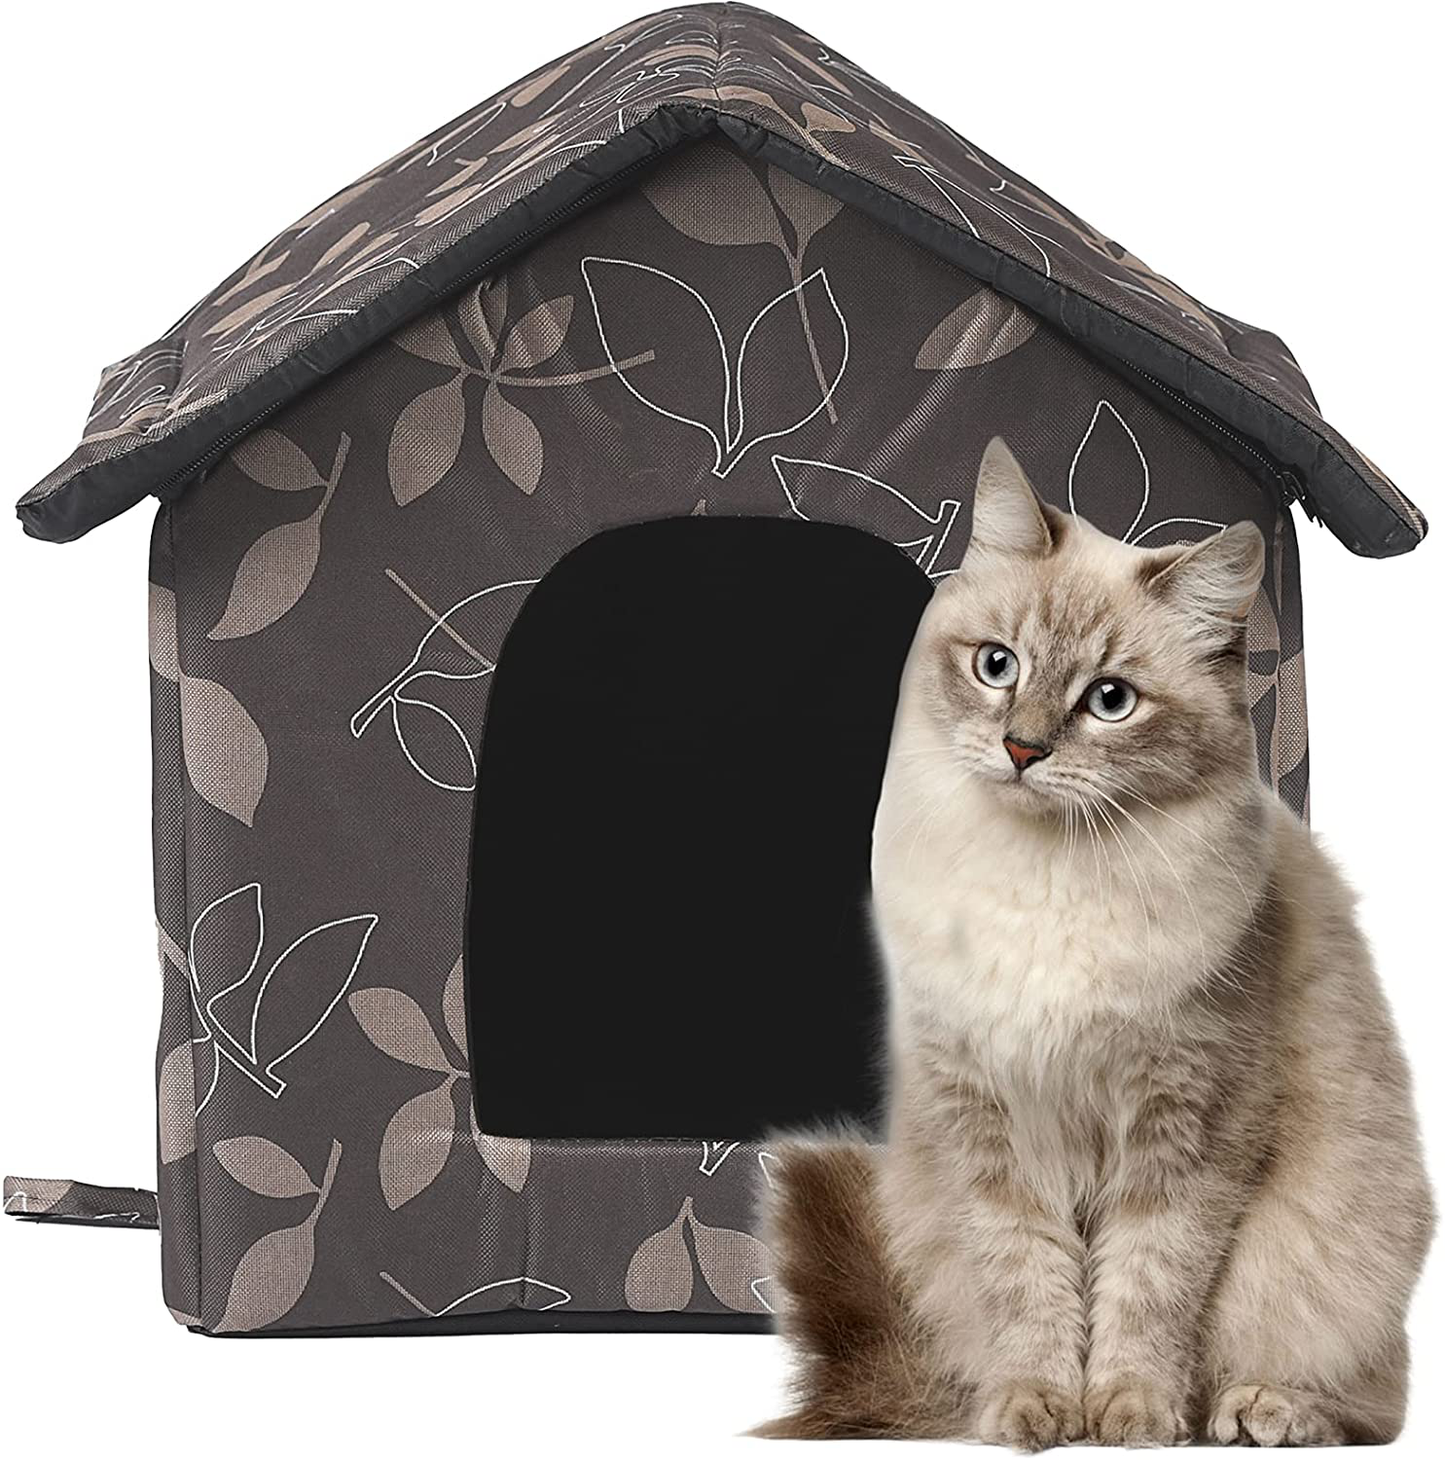 KUDES Cat House with Removable Cushion, Four Season Pet Nest Kitty Shelter with Waterproof Canvas Roof, Washable and Foldable Feral Cat Kennel Cave House Small Dog Tent Cabin for Indoor Outdoor Animals & Pet Supplies > Pet Supplies > Dog Supplies > Dog Houses KUDES S(Under 3.3lb.)  